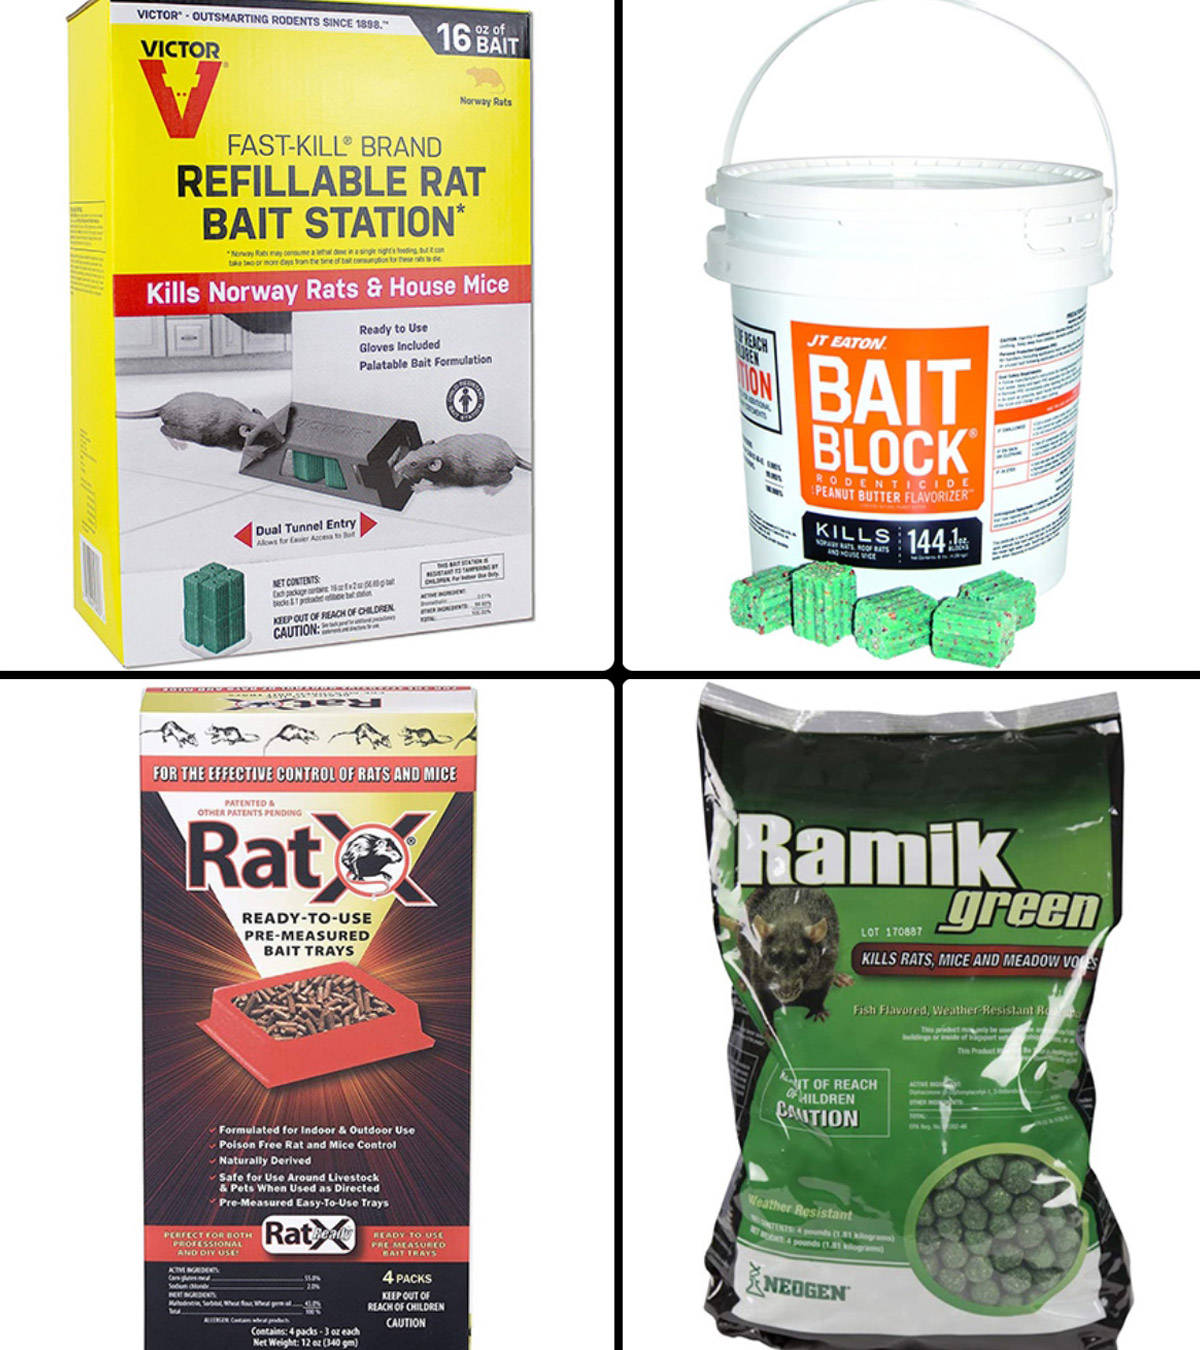 How to Make Rat Poison at Home: 4 Methods